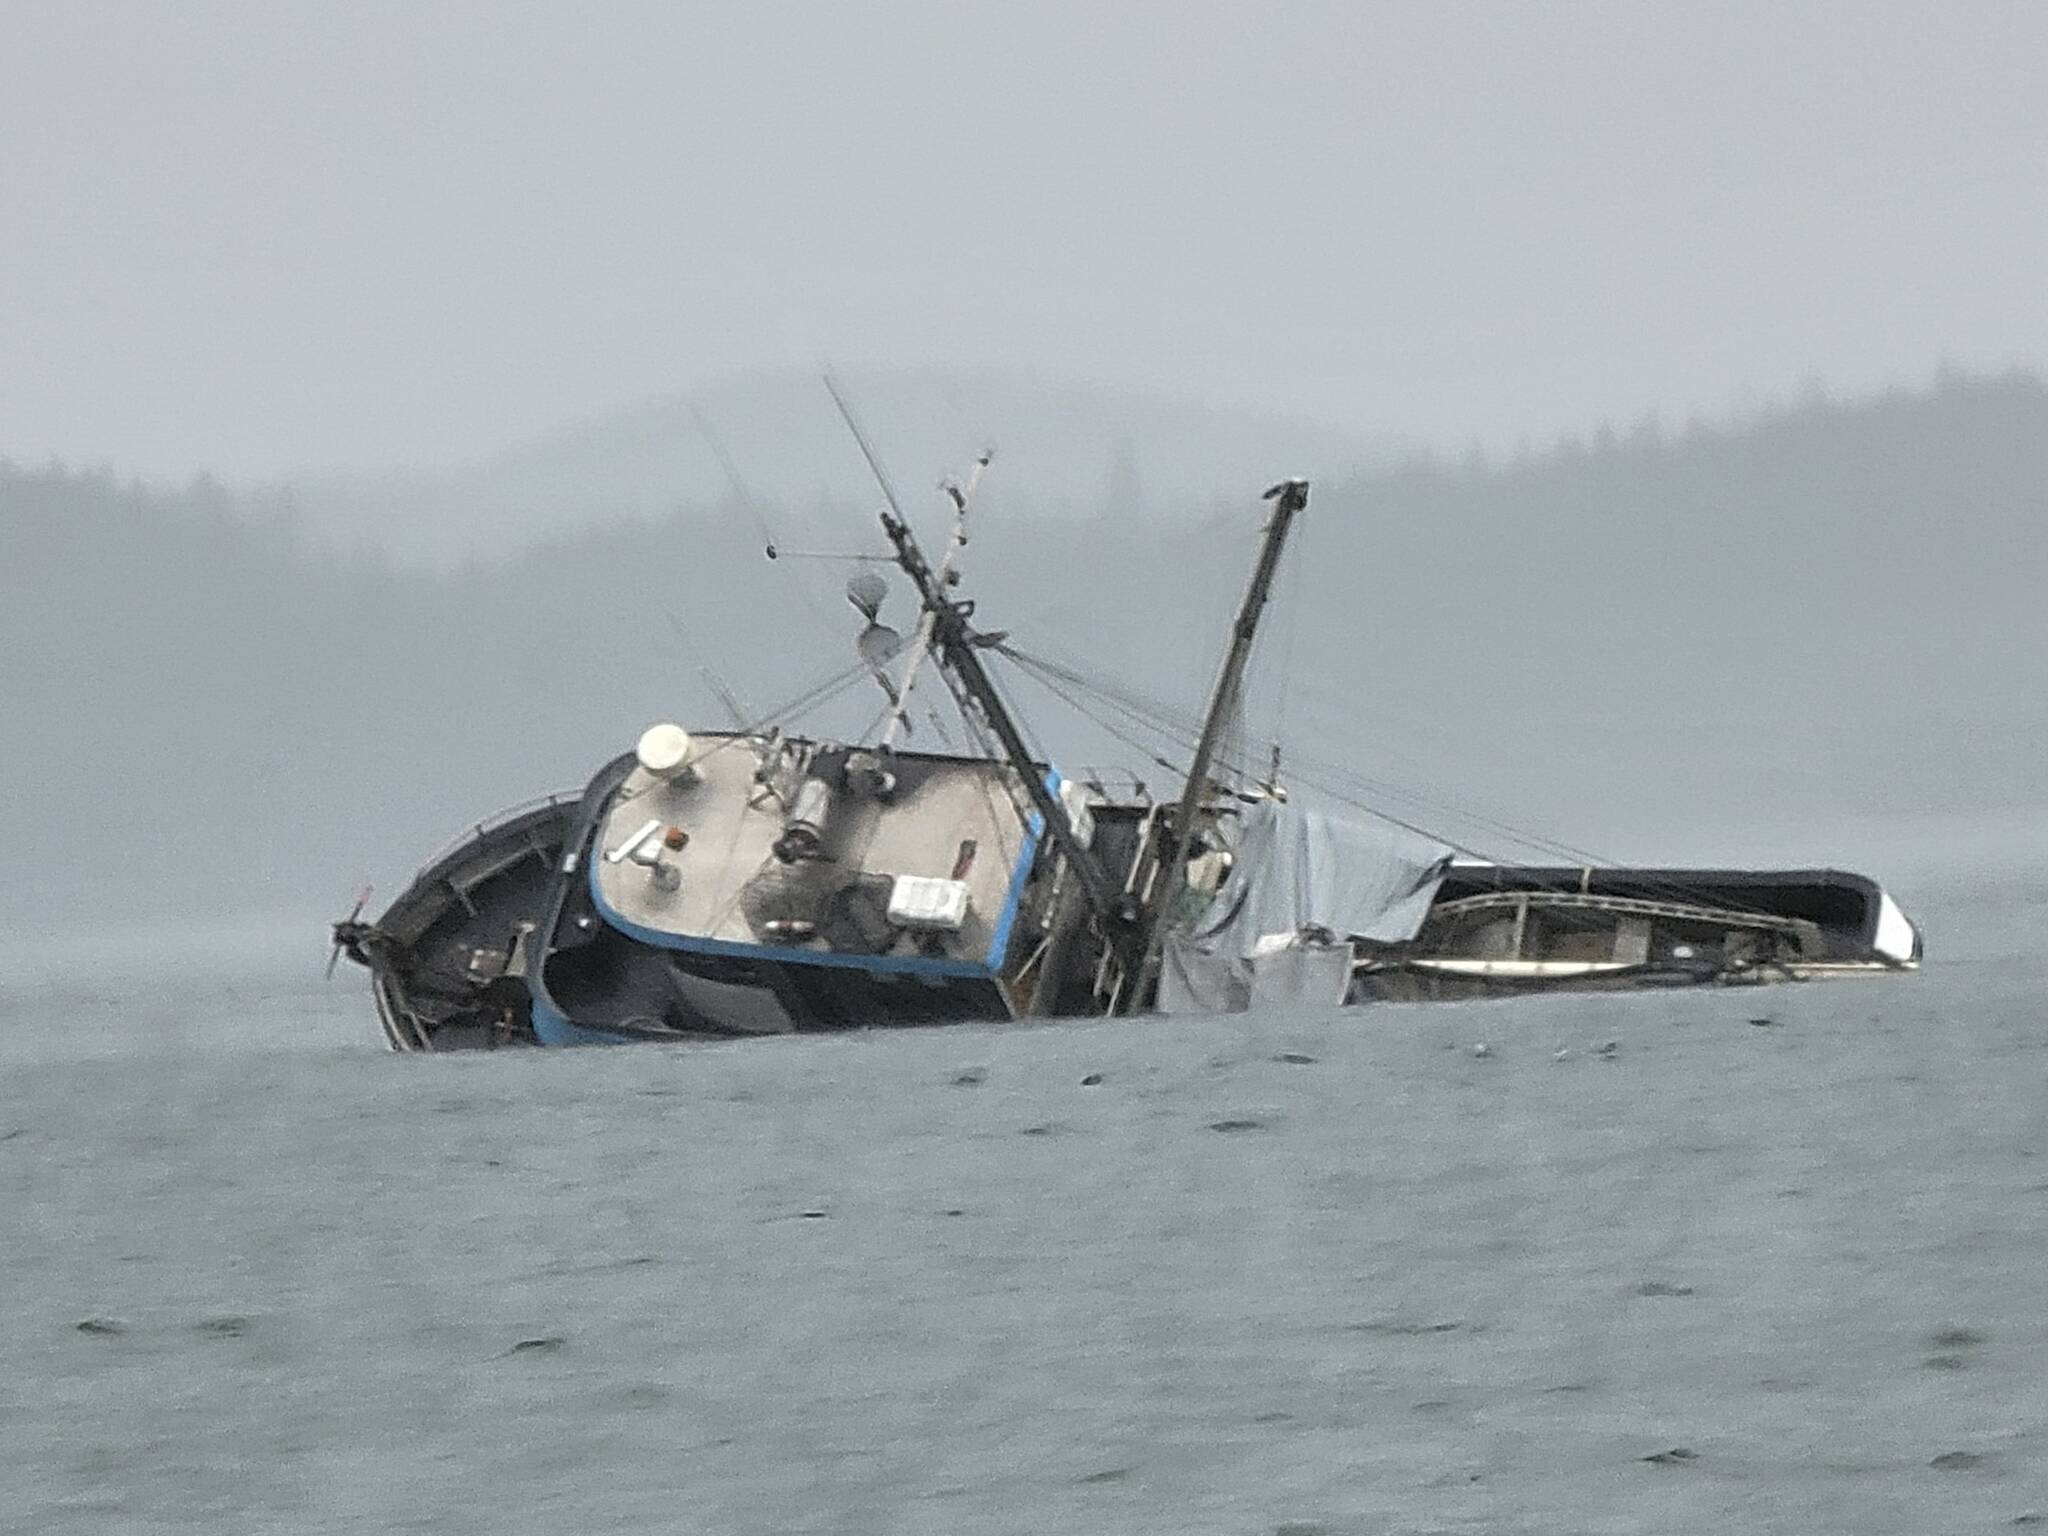 Courtesy Photo / Gregory Chaney
A commercial salvage company Melinos Marine Service was on the scene on Saturday and Sunday, and they were able to remove the gasoline and the hazardous materials aboard the 60-foot fishing vessel.